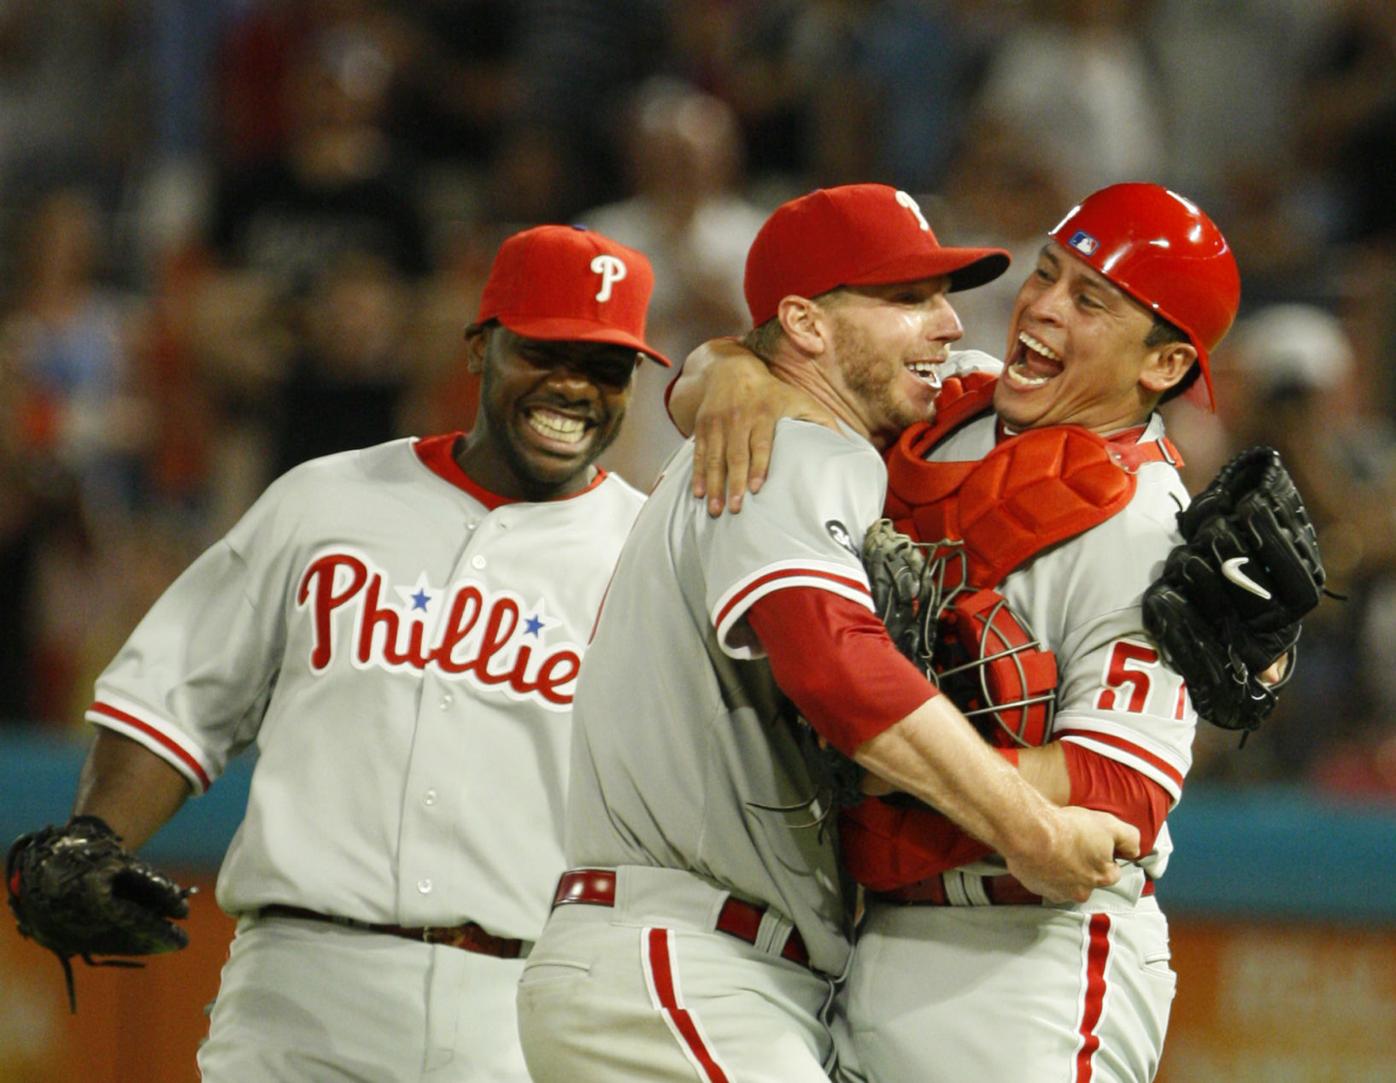 Phillies to Retire Number 34 for Roy Halladay